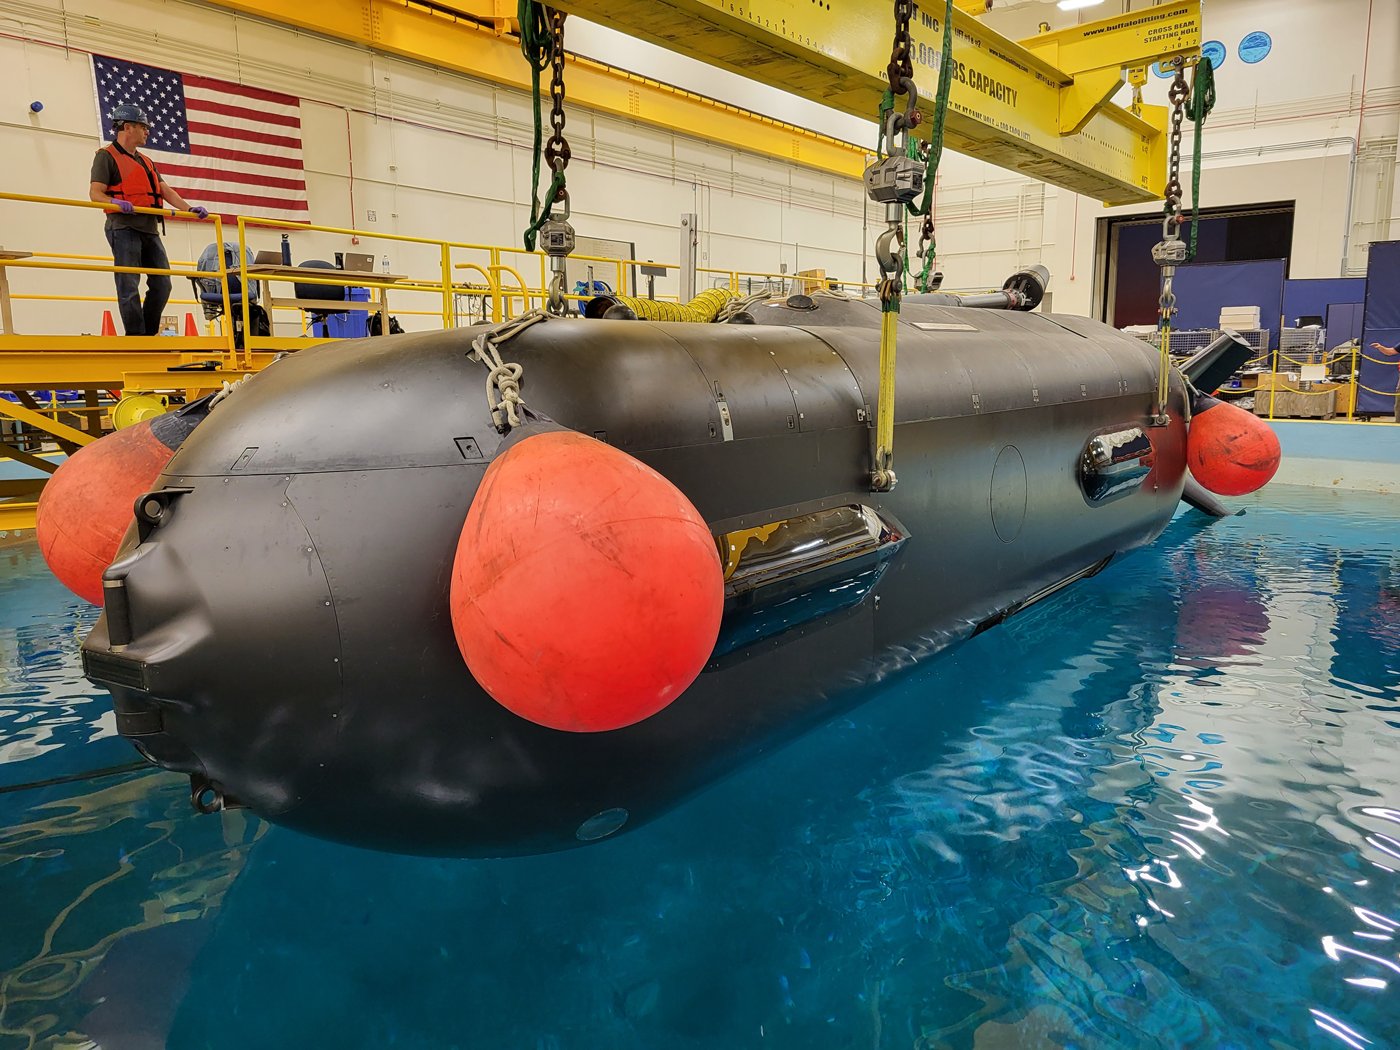 Orca XLUUV builds on more than 50 years of Boeing experience building and operating undersea vehicles